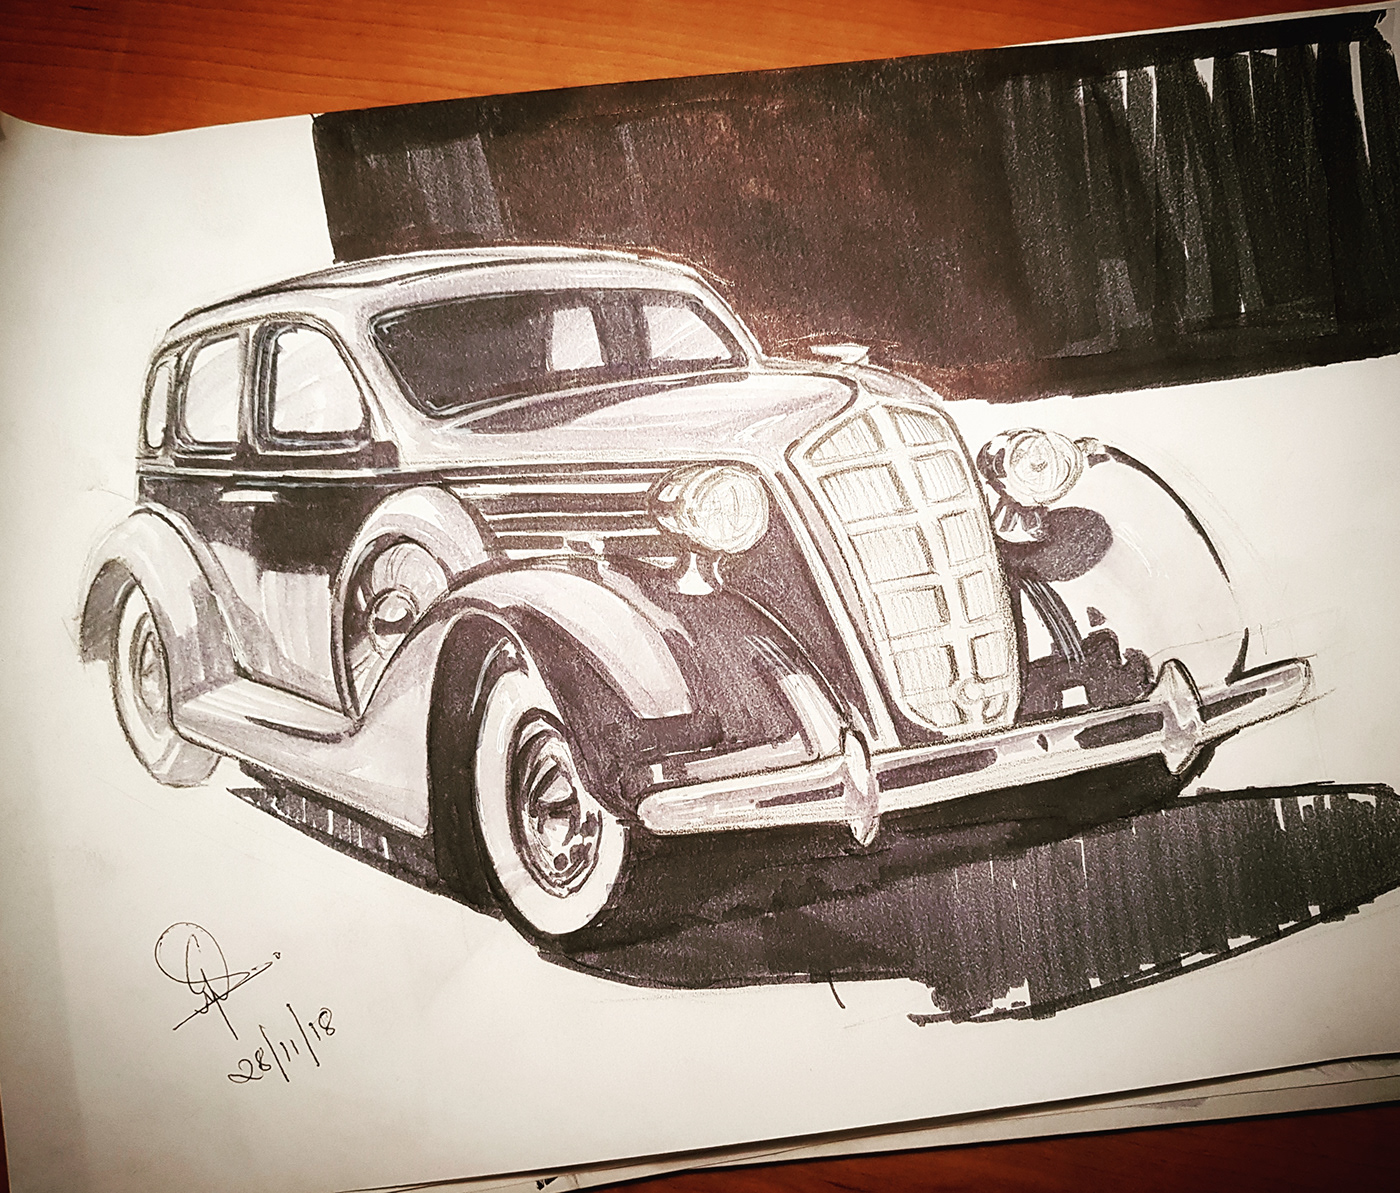 Image may contain: car, book and sketch